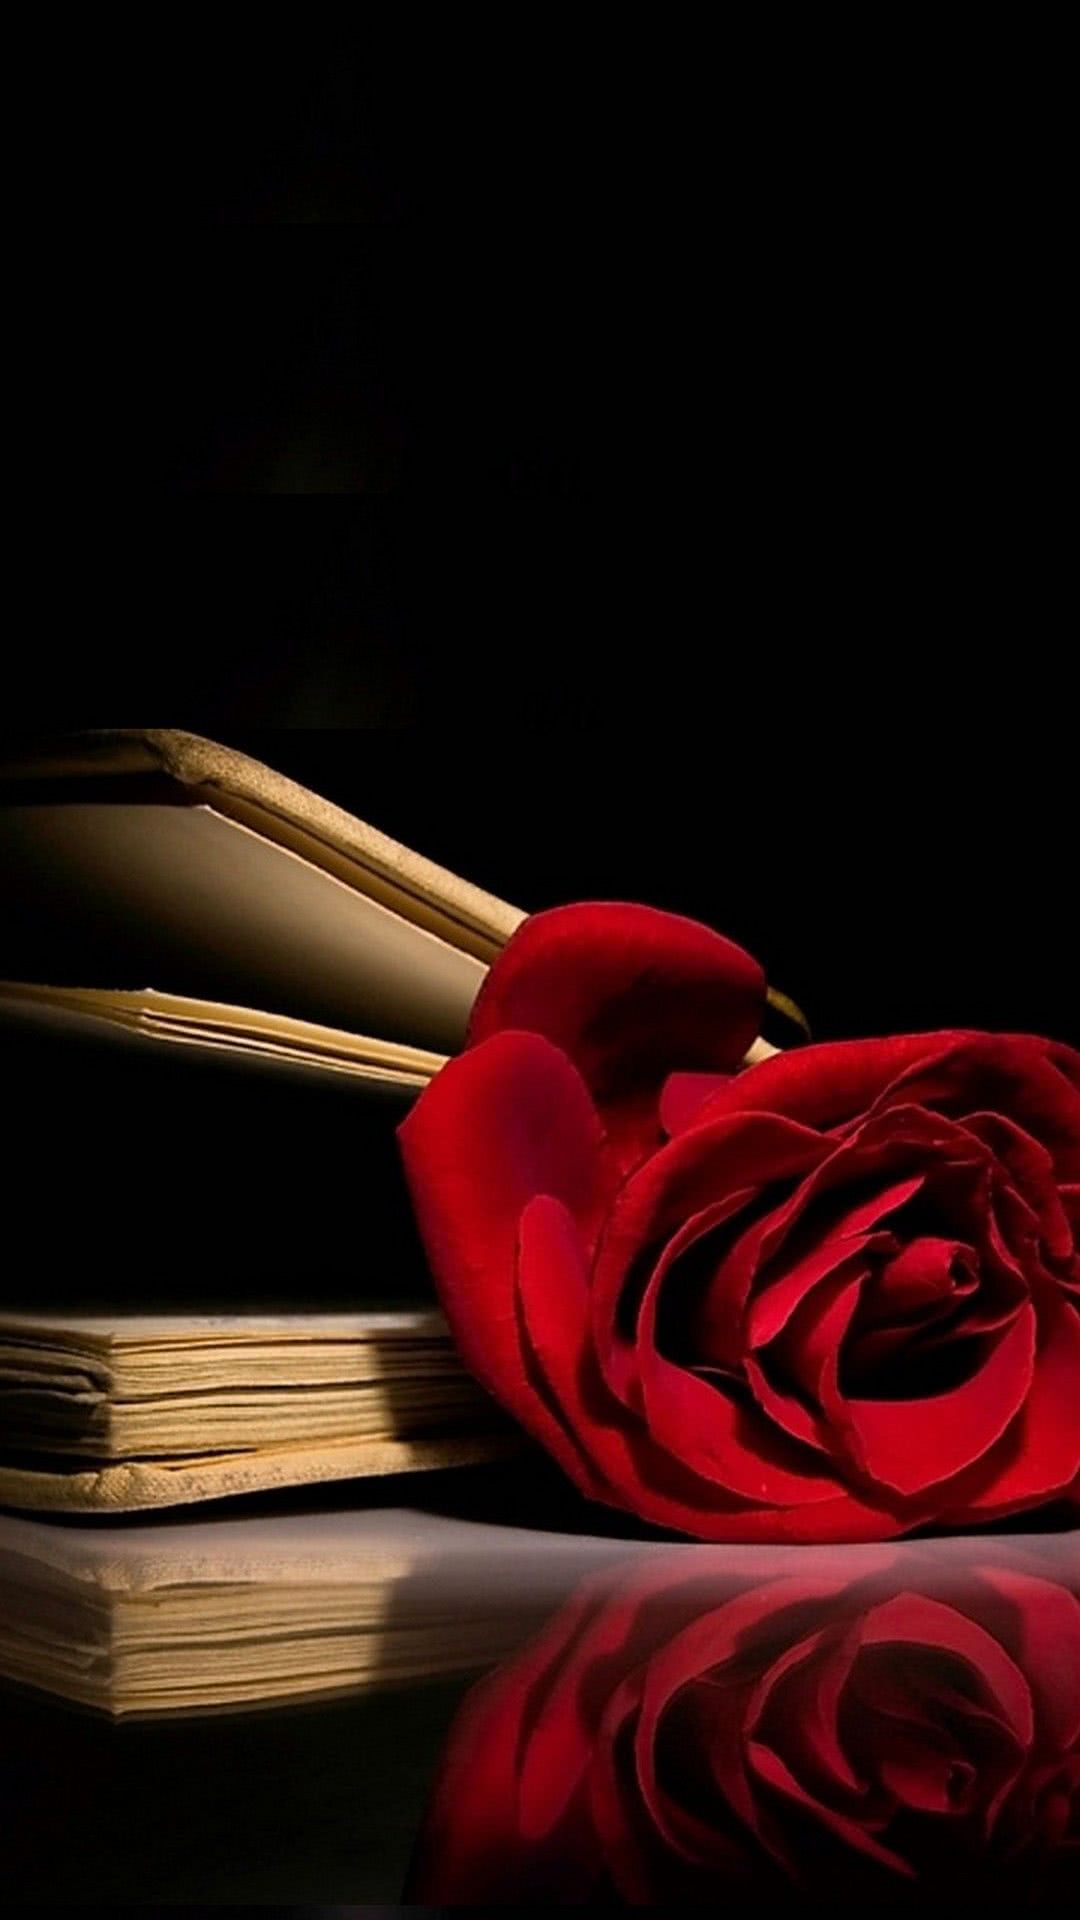 Rose And Book iPhone Wallpaper